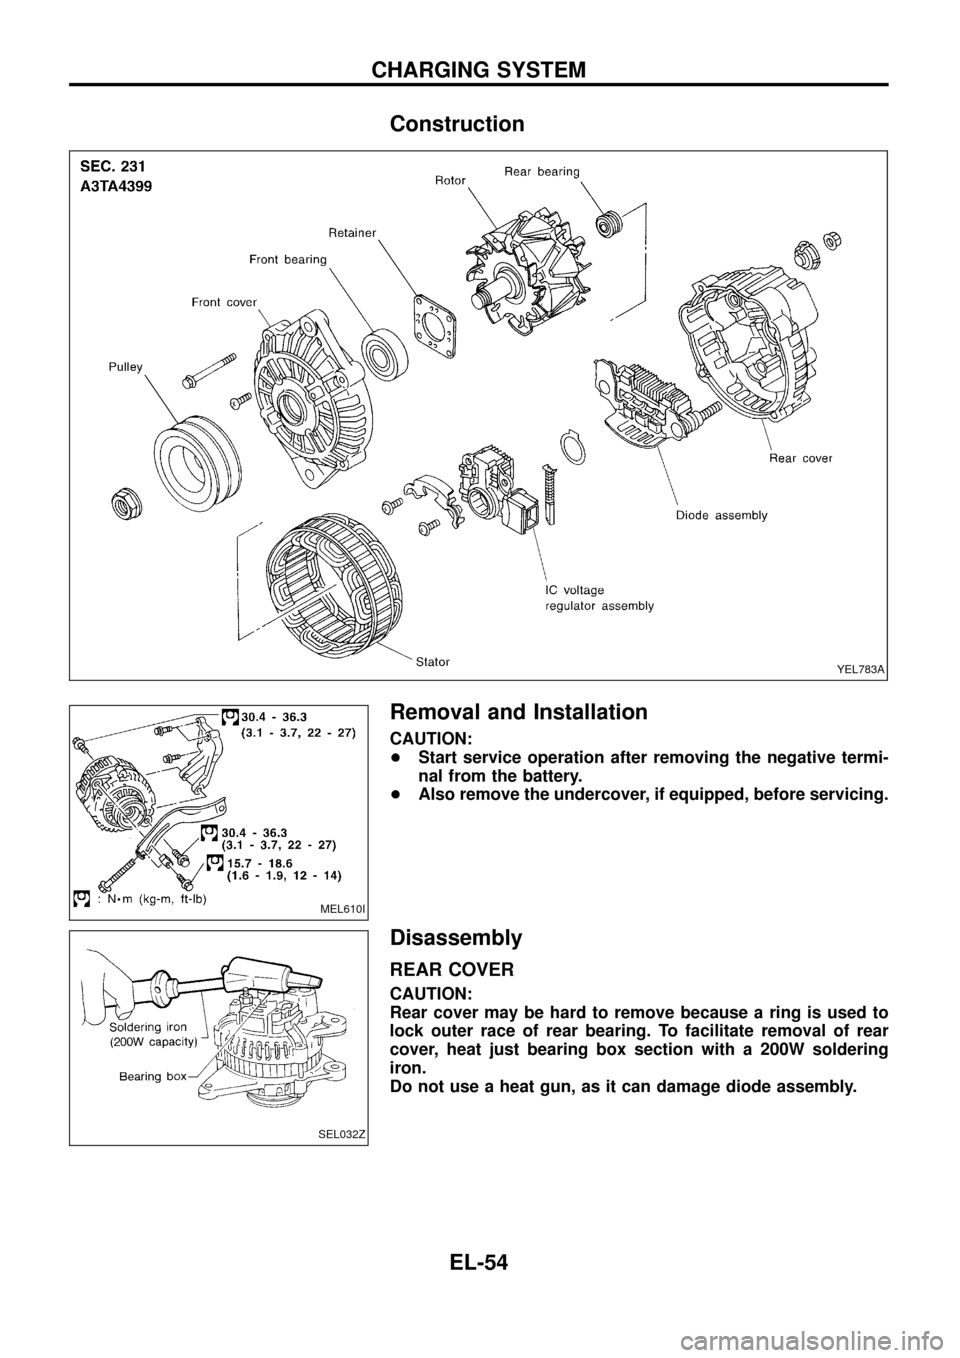 NISSAN PATROL 1998 Y61 / 5.G Electrical System Repair Manual Construction
Removal and Installation
CAUTION:
+Start service operation after removing the negative termi-
nal from the battery.
+Also remove the undercover, if equipped, before servicing.
Disassembly